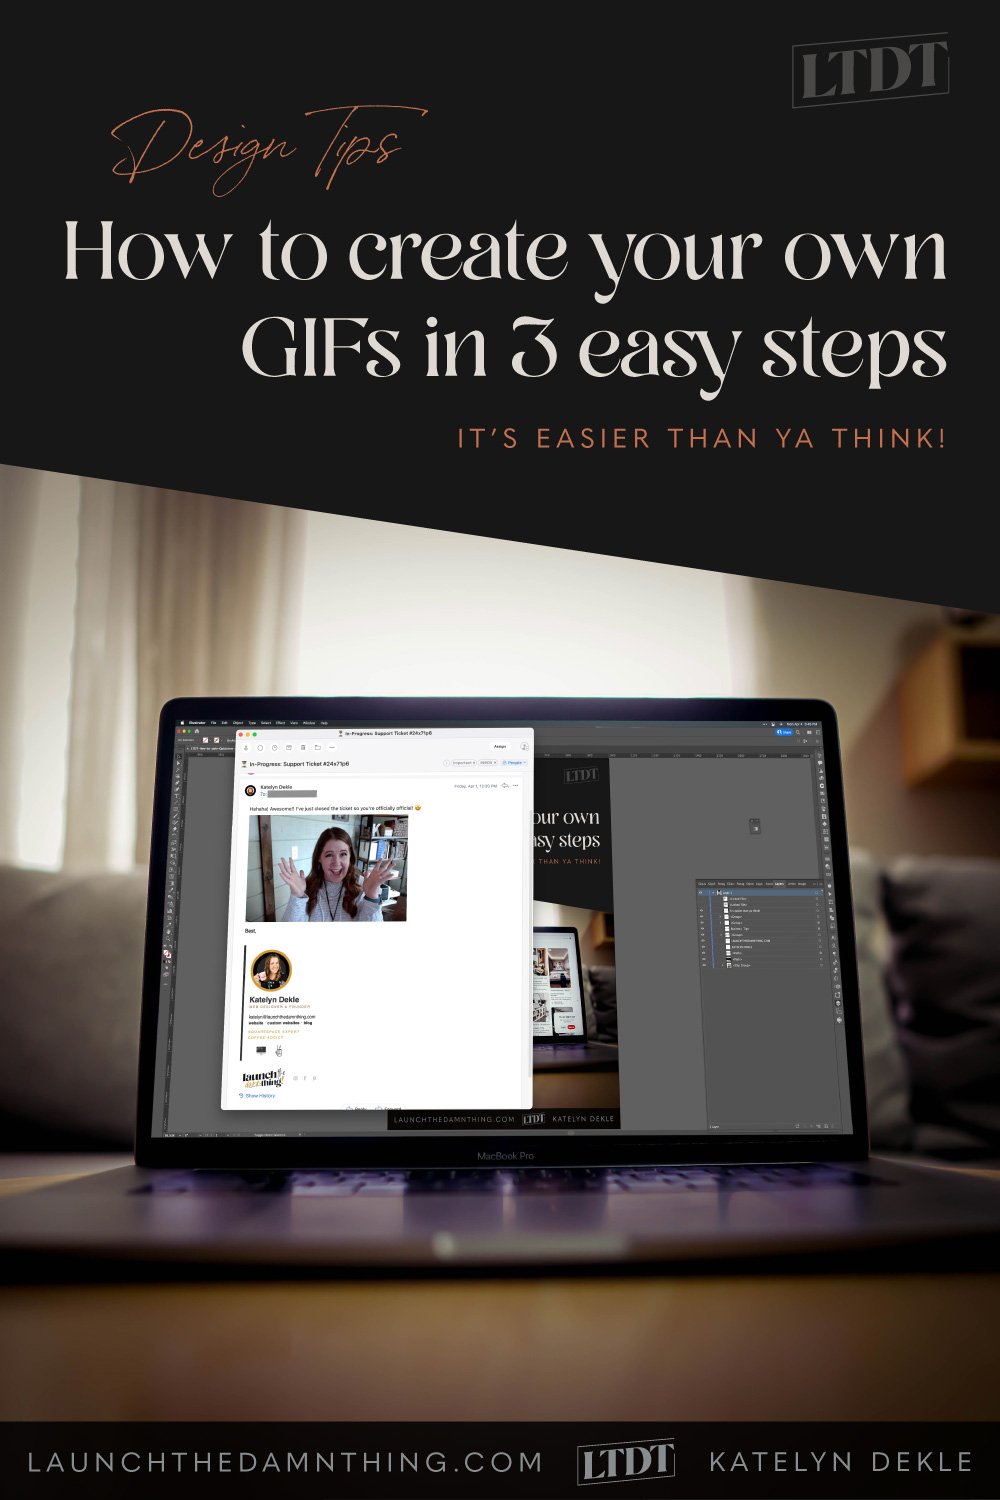 How to create your own custom GIFs in 3 easy steps